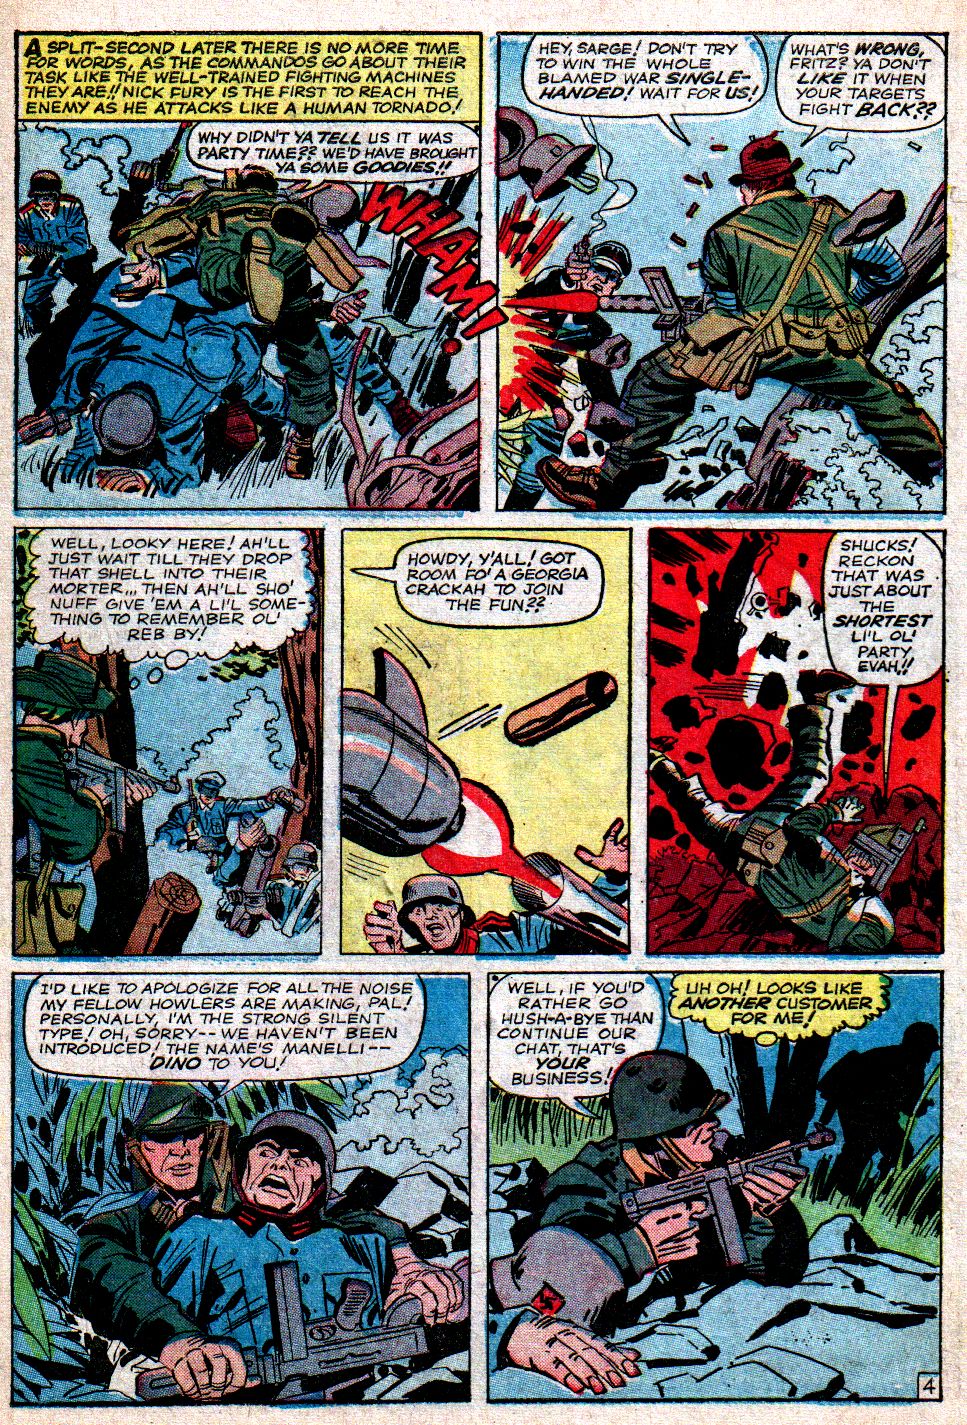 Read online Sgt. Fury comic -  Issue #7 - 6